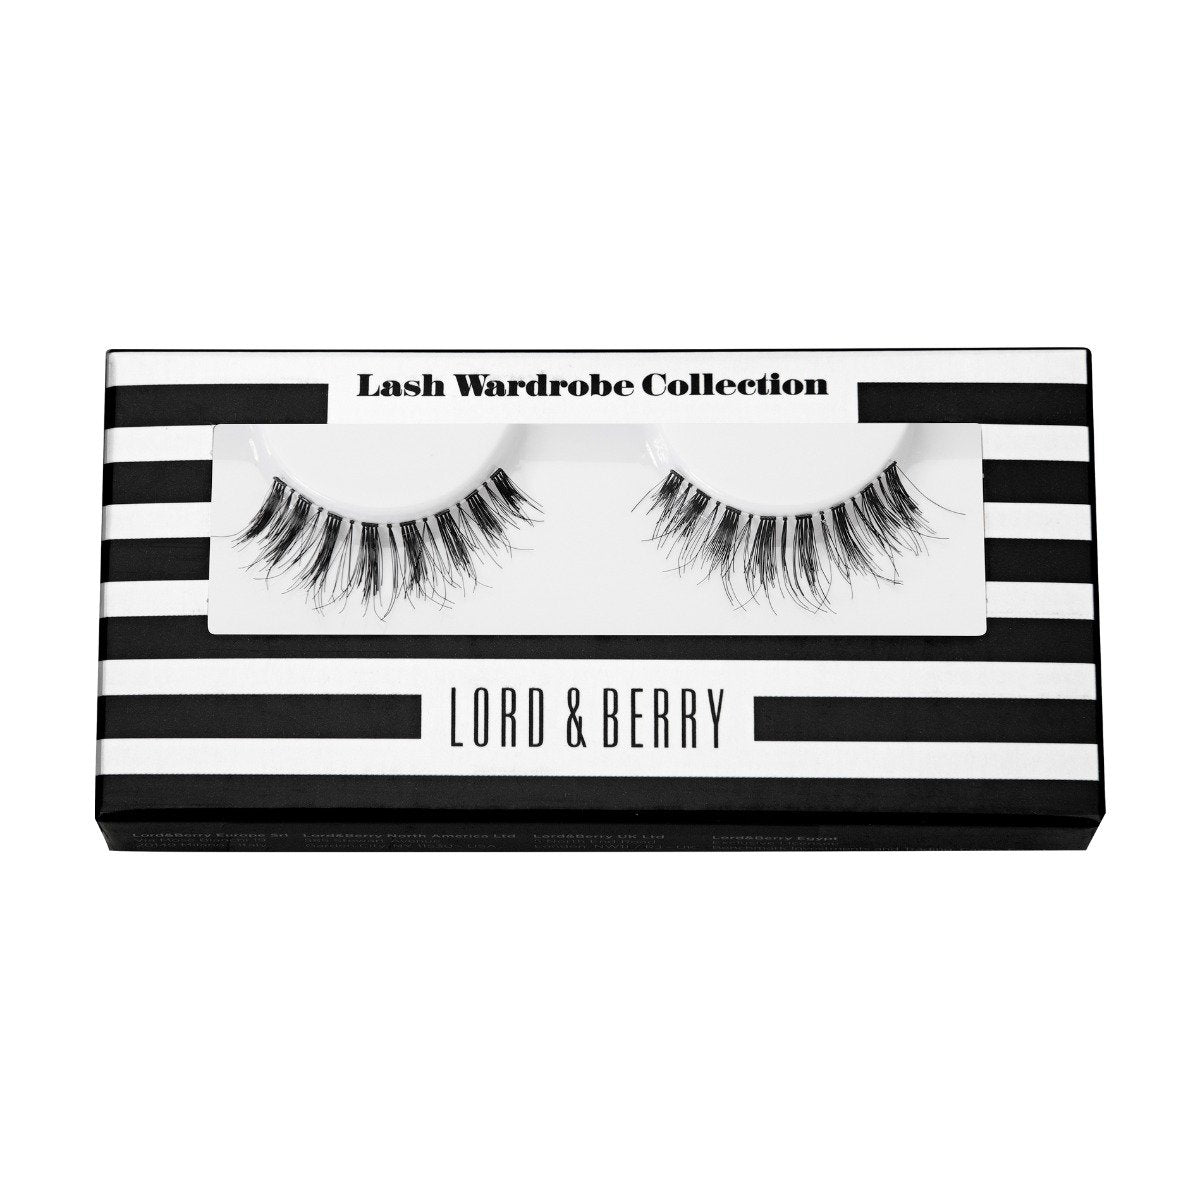 Lord & Berry Eyelashes Wardrobe Collection - EL5 - Bloom Pharmacy